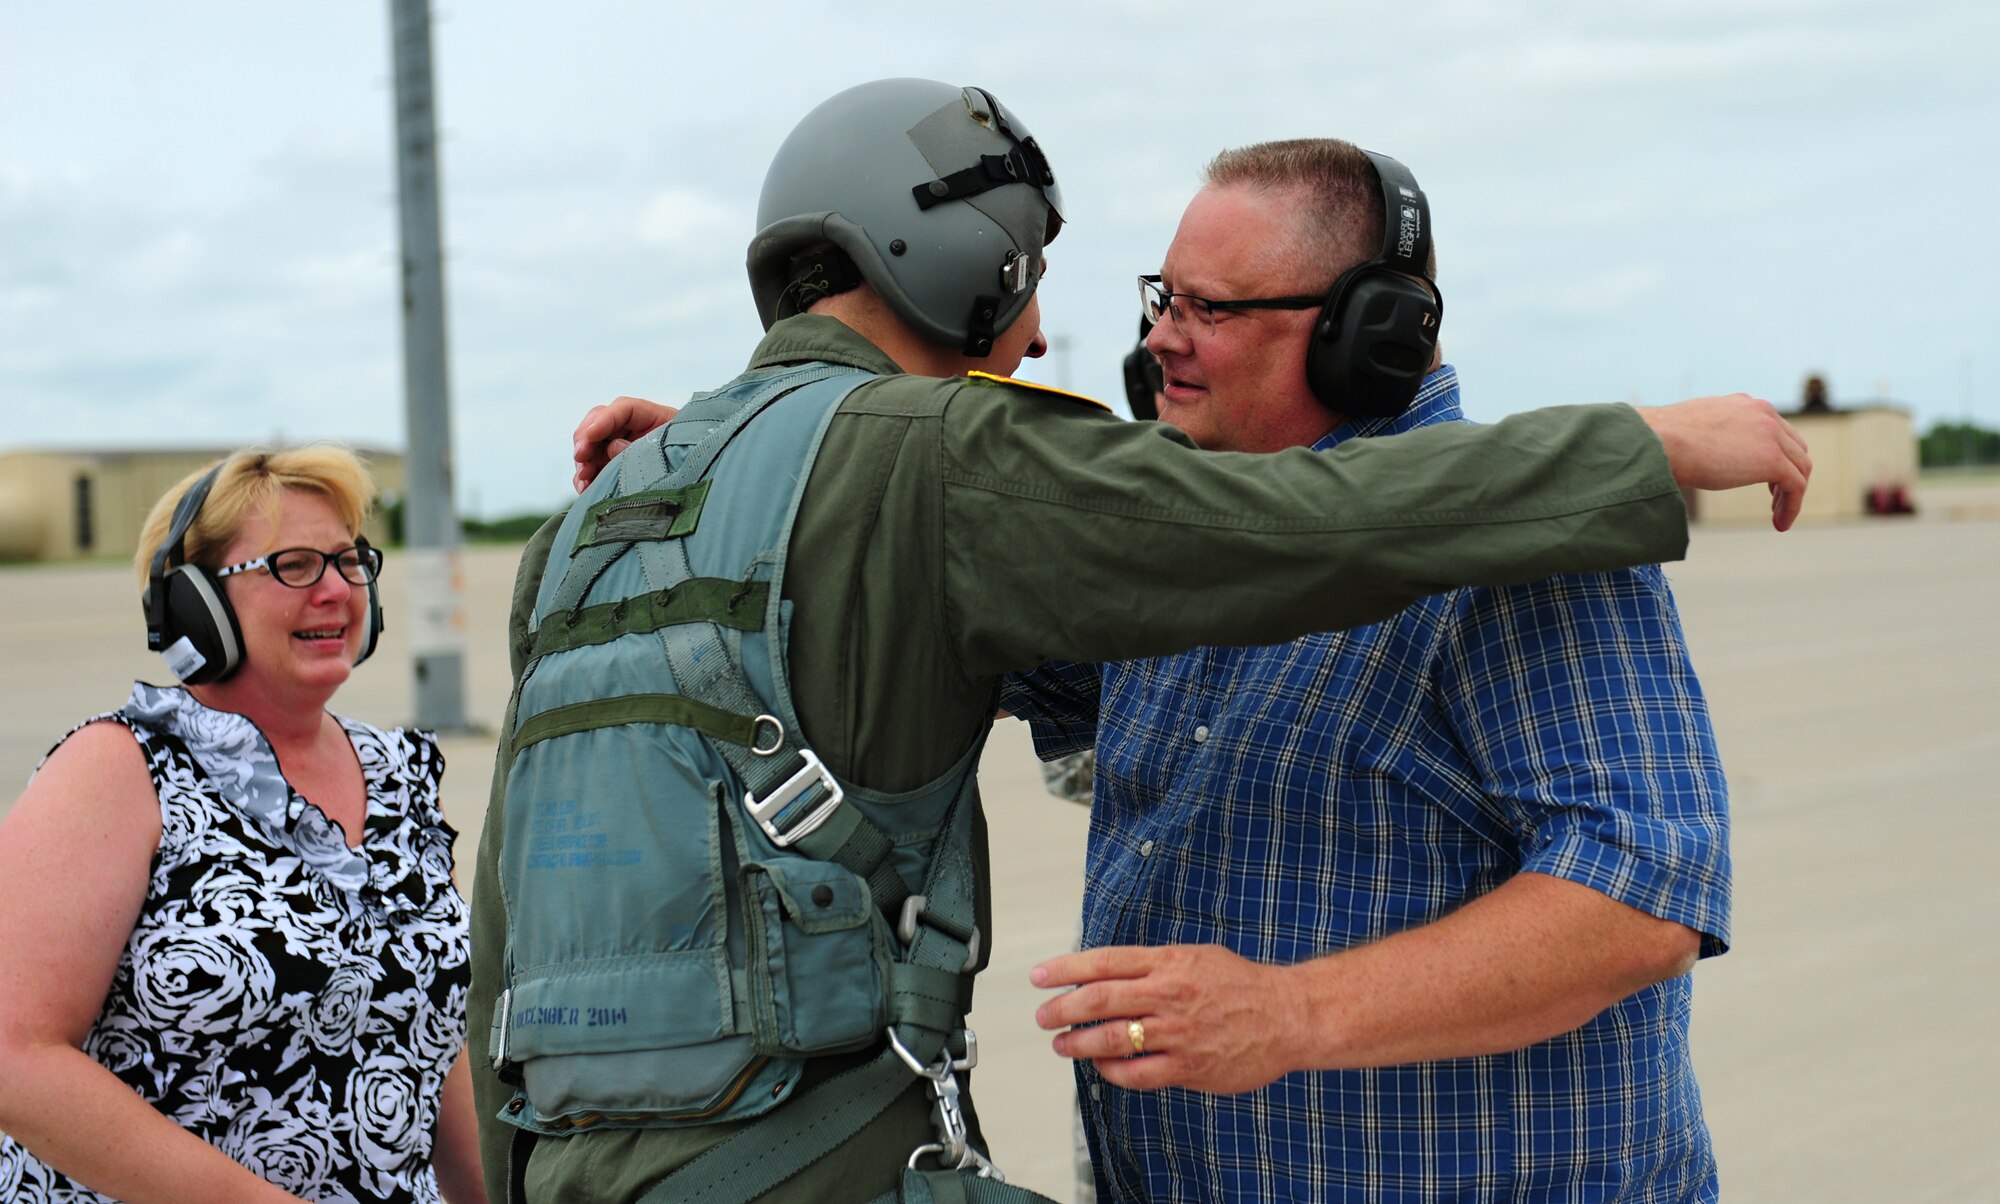 Air Force Staff Sgt. Brian Schroeder, 509th Aircraft Maintenance Squadron dedicated crew chief, hugs his father after finishing his B-2 Spirit incentive flight at Whiteman Air Force Base, Mo., July 10, 2015. Schroeder was awarded an incentive flight in the B-2 Spirit for being named the 2014 Air Force Global Strike Command Crew Chief of the Year.
(U.S. Air Force photo by Senior Airman Joel Pfiester/Released)
